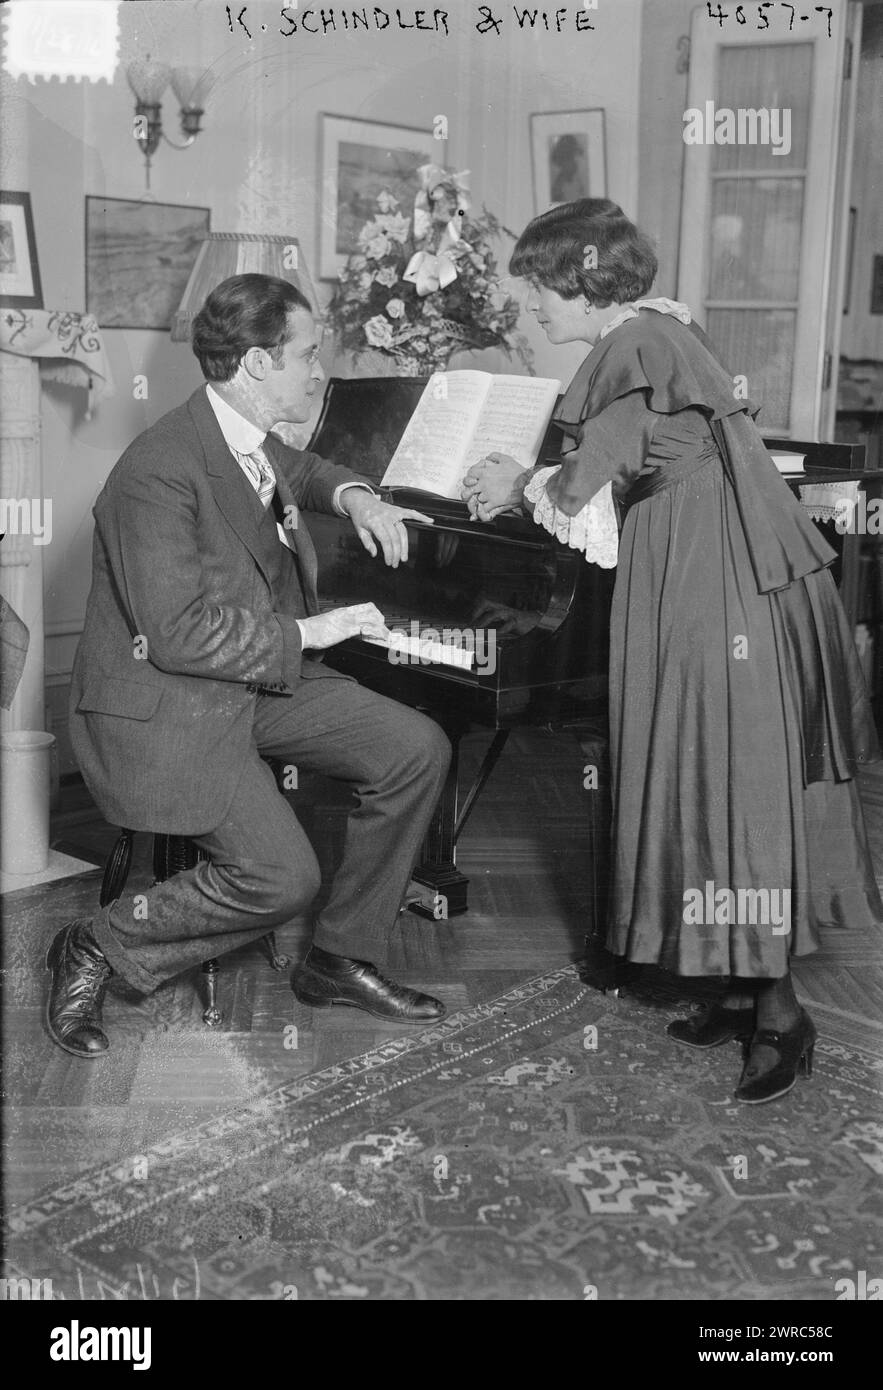 K. Schindler & wife, Photograph shows German composer and conductor Kurt Schindler at a piano with his wife, actress wife Russian actress Vera Androuchevitch (d. 1919)., 1916 Nov. 28, Glass negatives, 1 negative: glass Stock Photo